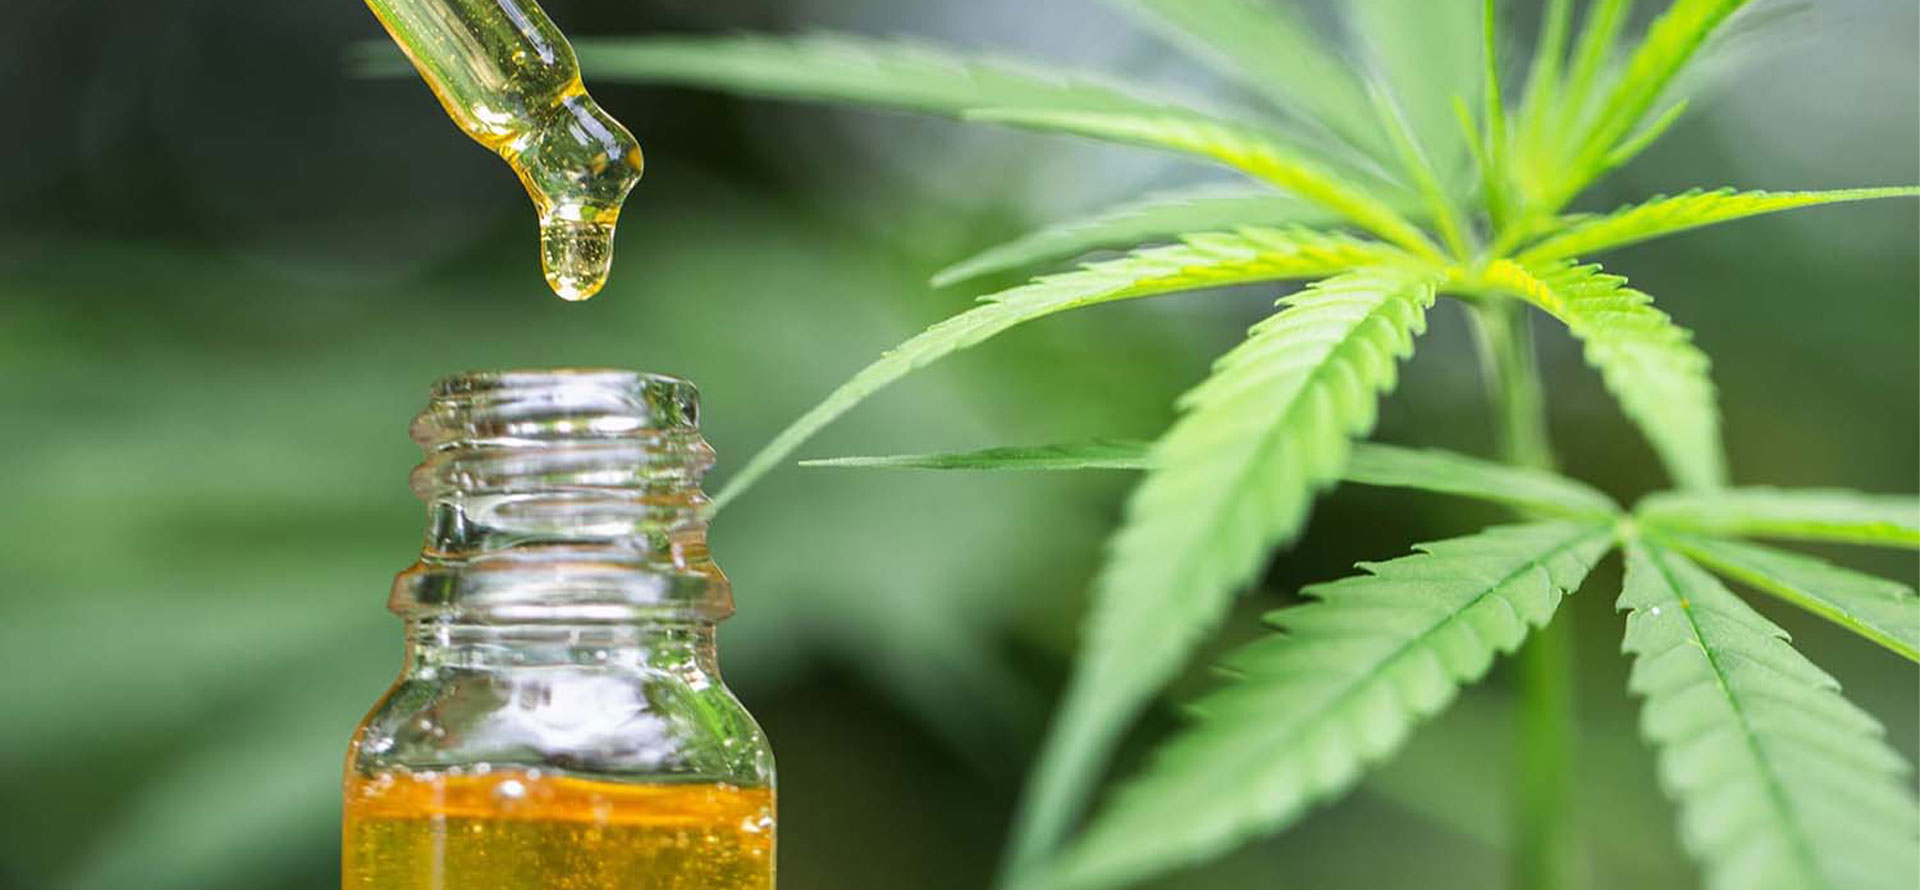 CALIFORNIA CBC OIL LAWS - Cbd|Oil|Benefits|Cbc|Effects|Pain|Study|Health|Thc|Products|Cannabinoids|Studies|Research|Anxiety|Cannabis|Symptoms|Evidence|People|System|Disease|Treatment|Inflammation|Hemp|Body|Receptors|Disorders|Brain|Plant|Cells|Side|Effect|Blood|Patients|Cancer|Product|Skin|Marijuana|Properties|Cannabidiol|Cannabinoid|Cbd Oil|Cbd Products|Cbc Oil|Side Effects|Endocannabinoid System|Chronic Pain|Multiple Sclerosis|Pain Relief|Cannabis Plant|Cbd Oil Benefits|Blood Pressure|Health Benefits|High Blood Pressure|Anti-Inflammatory Properties|Neuropathic Pain|Animal Studies|Hemp Plant|Hemp Oil|Anxiety Disorders|Cbd Product|Immune System|Clinical Trials|Cbd Gummies|Nerve Cells|Nervous System|Entourage Effect|Hemp Seed Oil|United States|Cbd Oils|Drug Administration